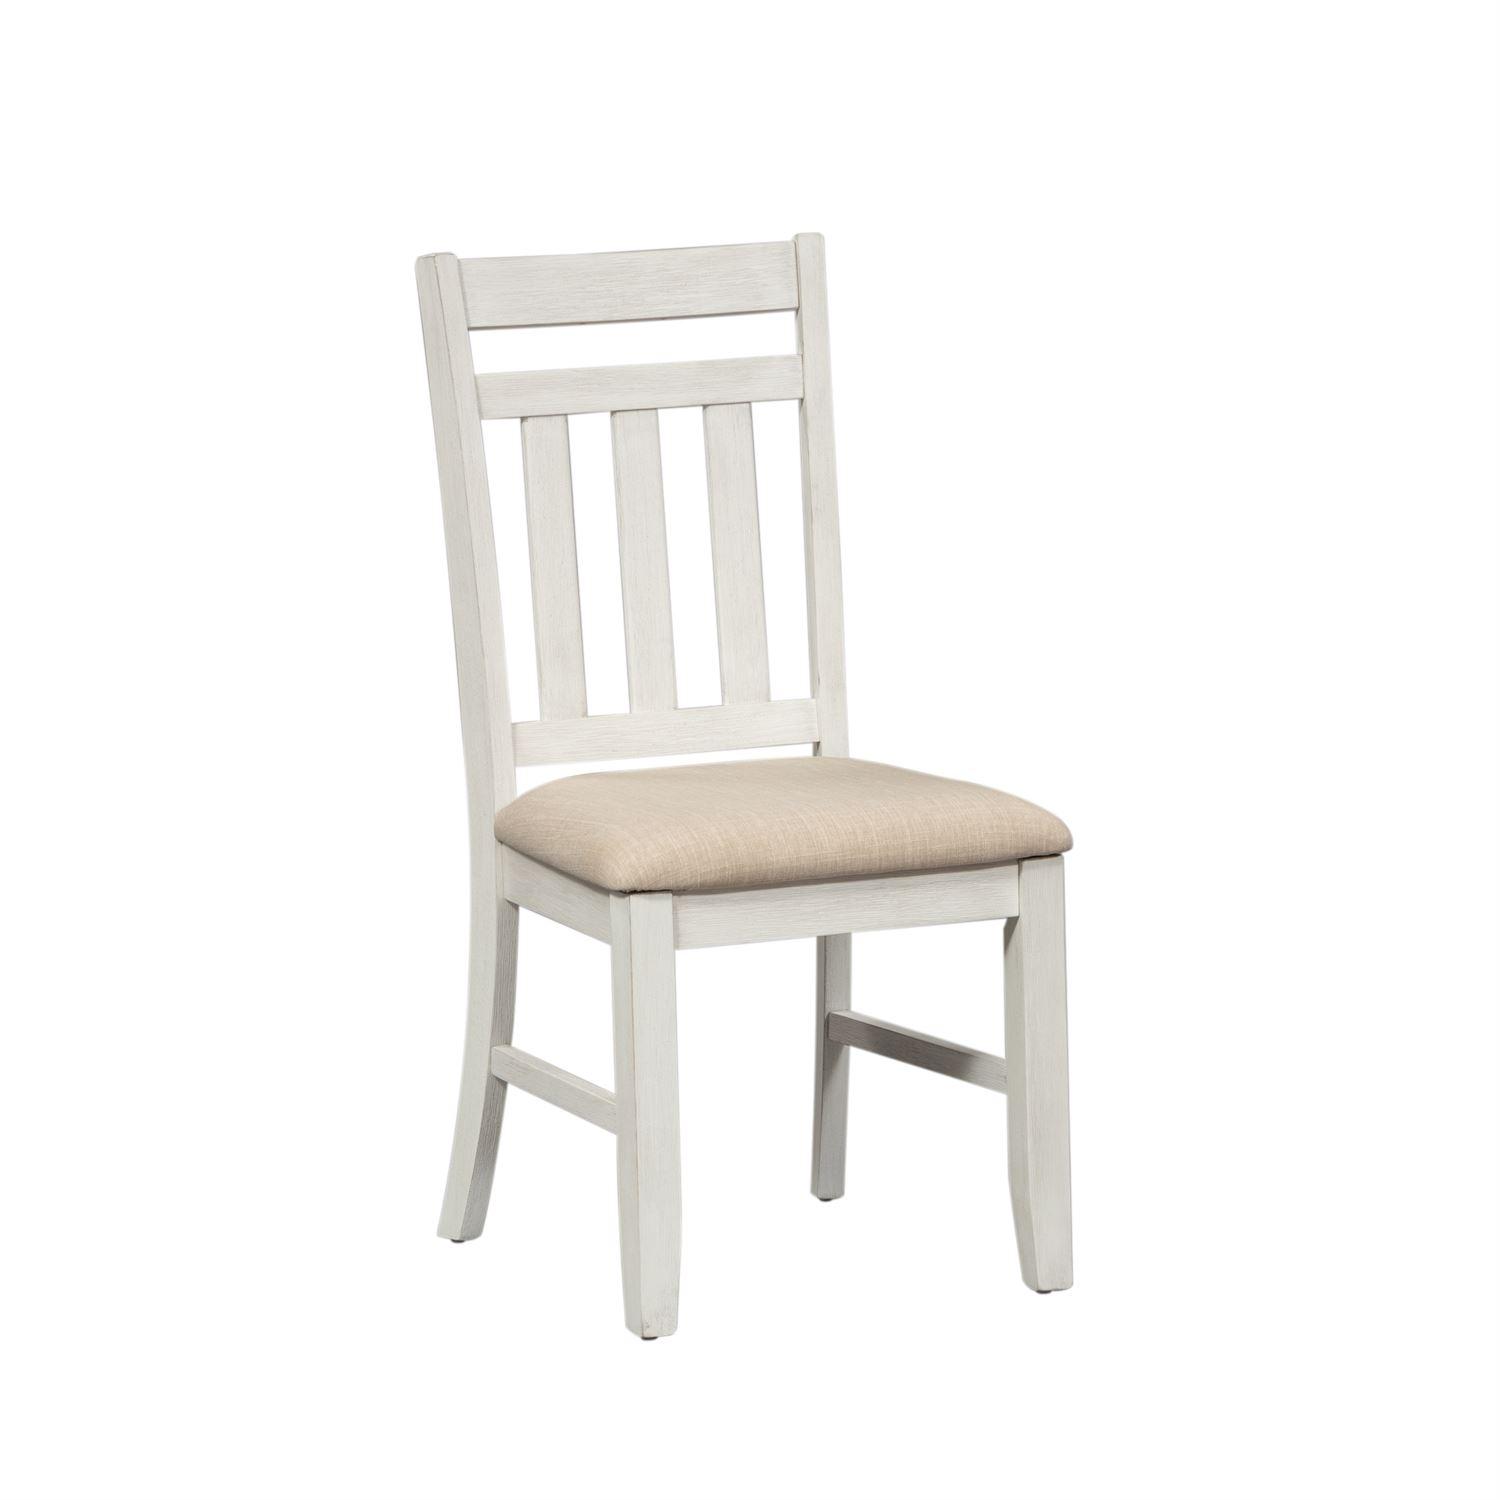 Traditional Dining Side Chair Summerville  (171-CD) Dining Side Chair 171-C1501S in White, Cream Linen